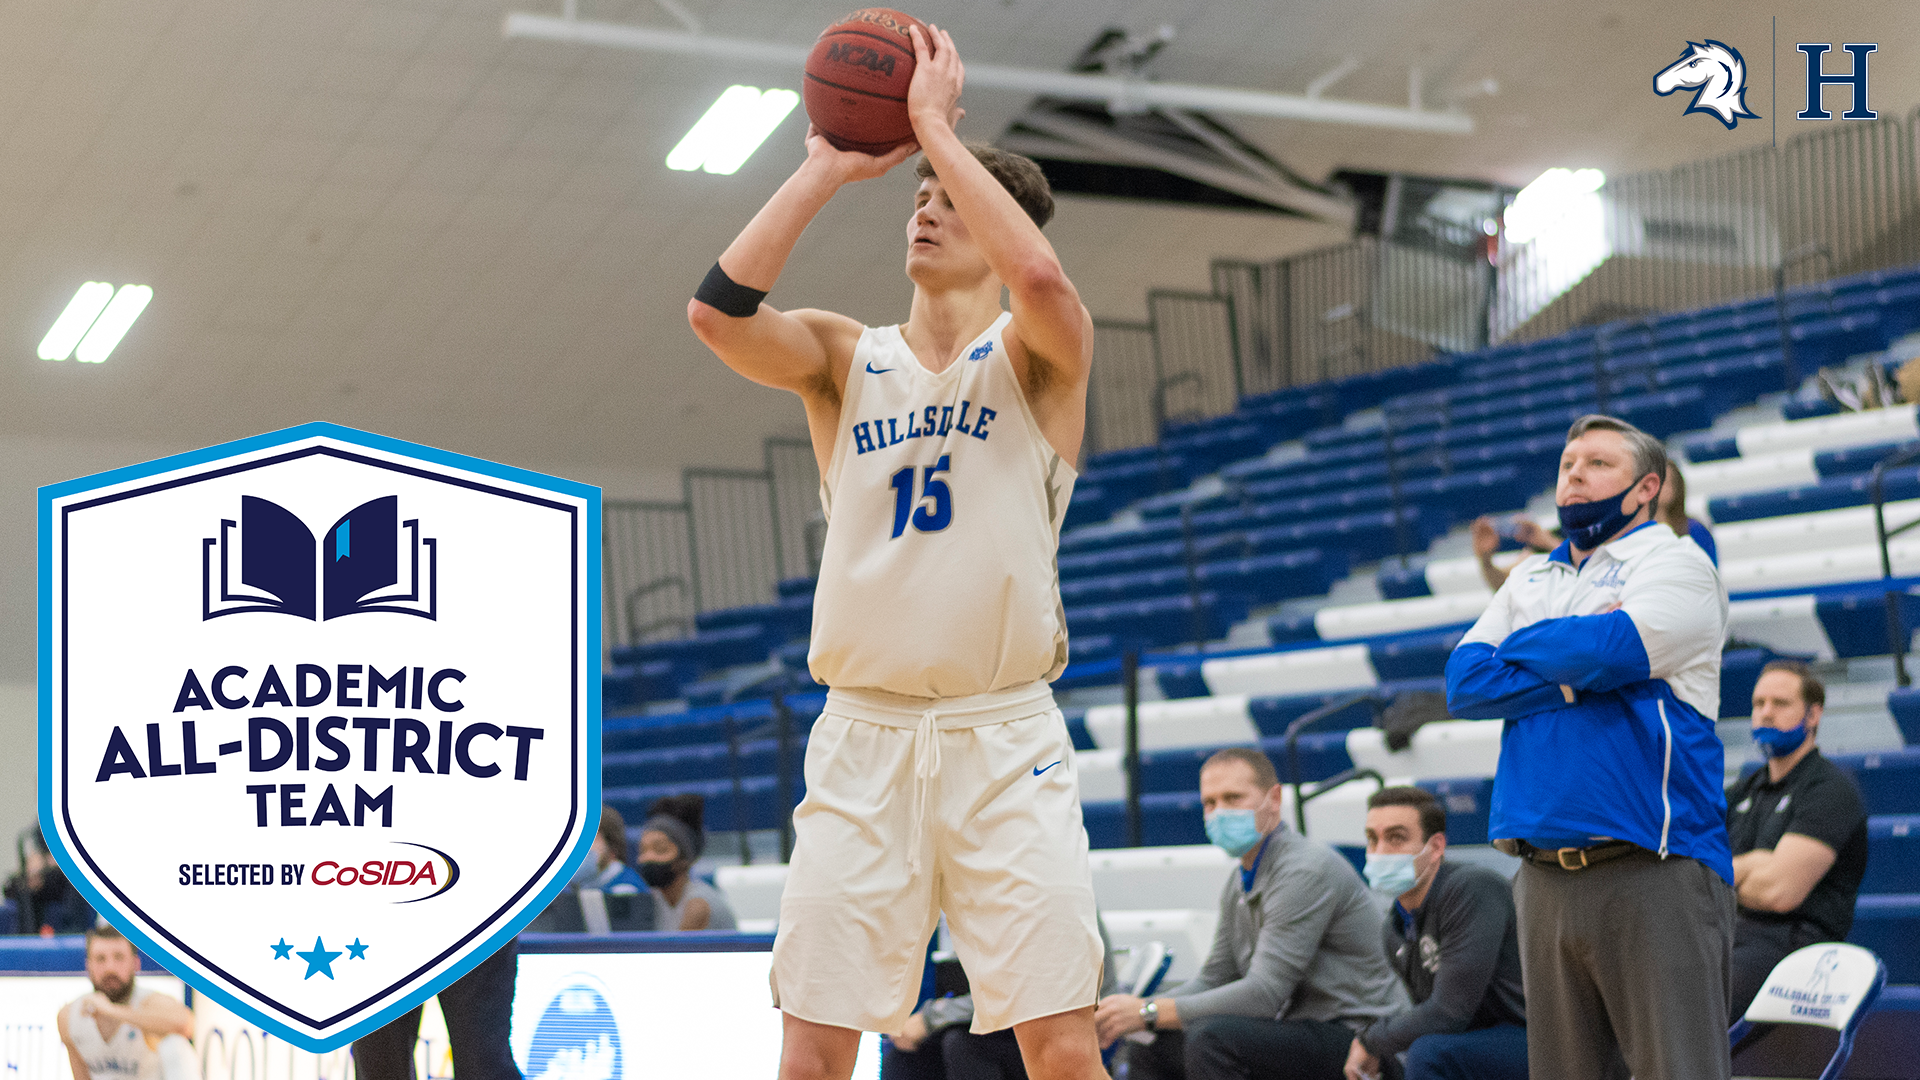 Chargers' Cartier earns CoSIDA Academic All-District honors